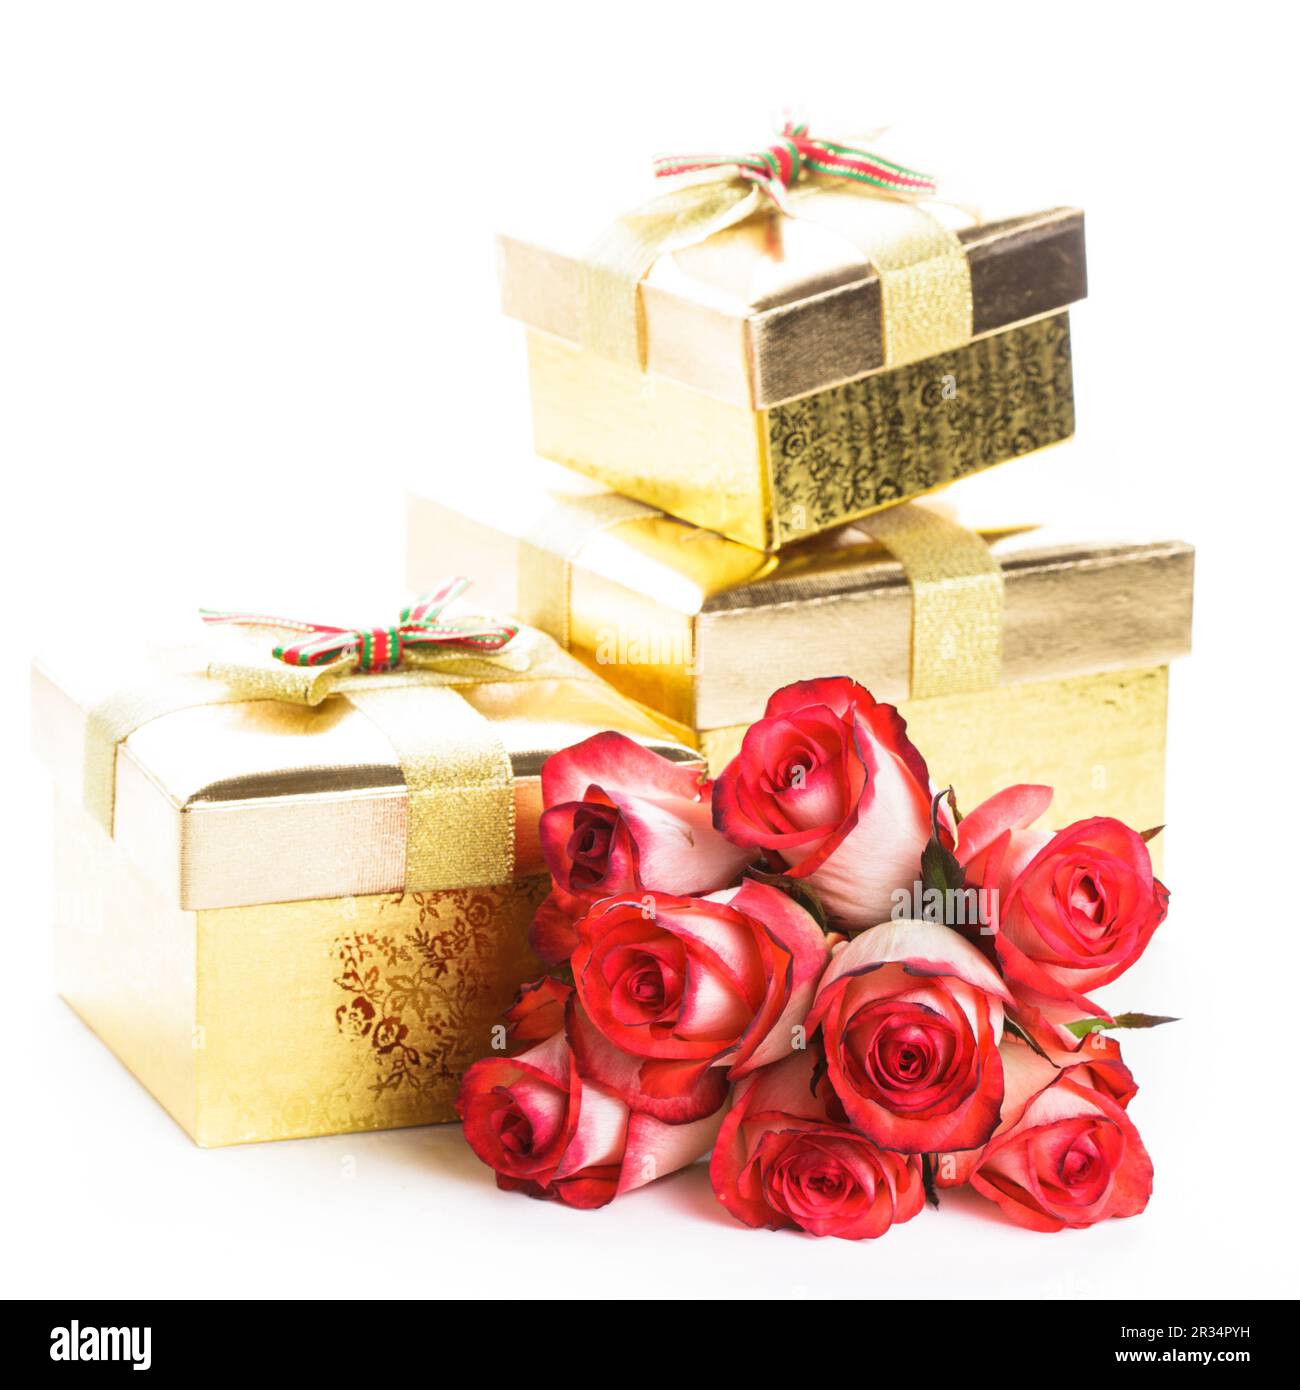 Gift box and bouquet of roses Stock Photo